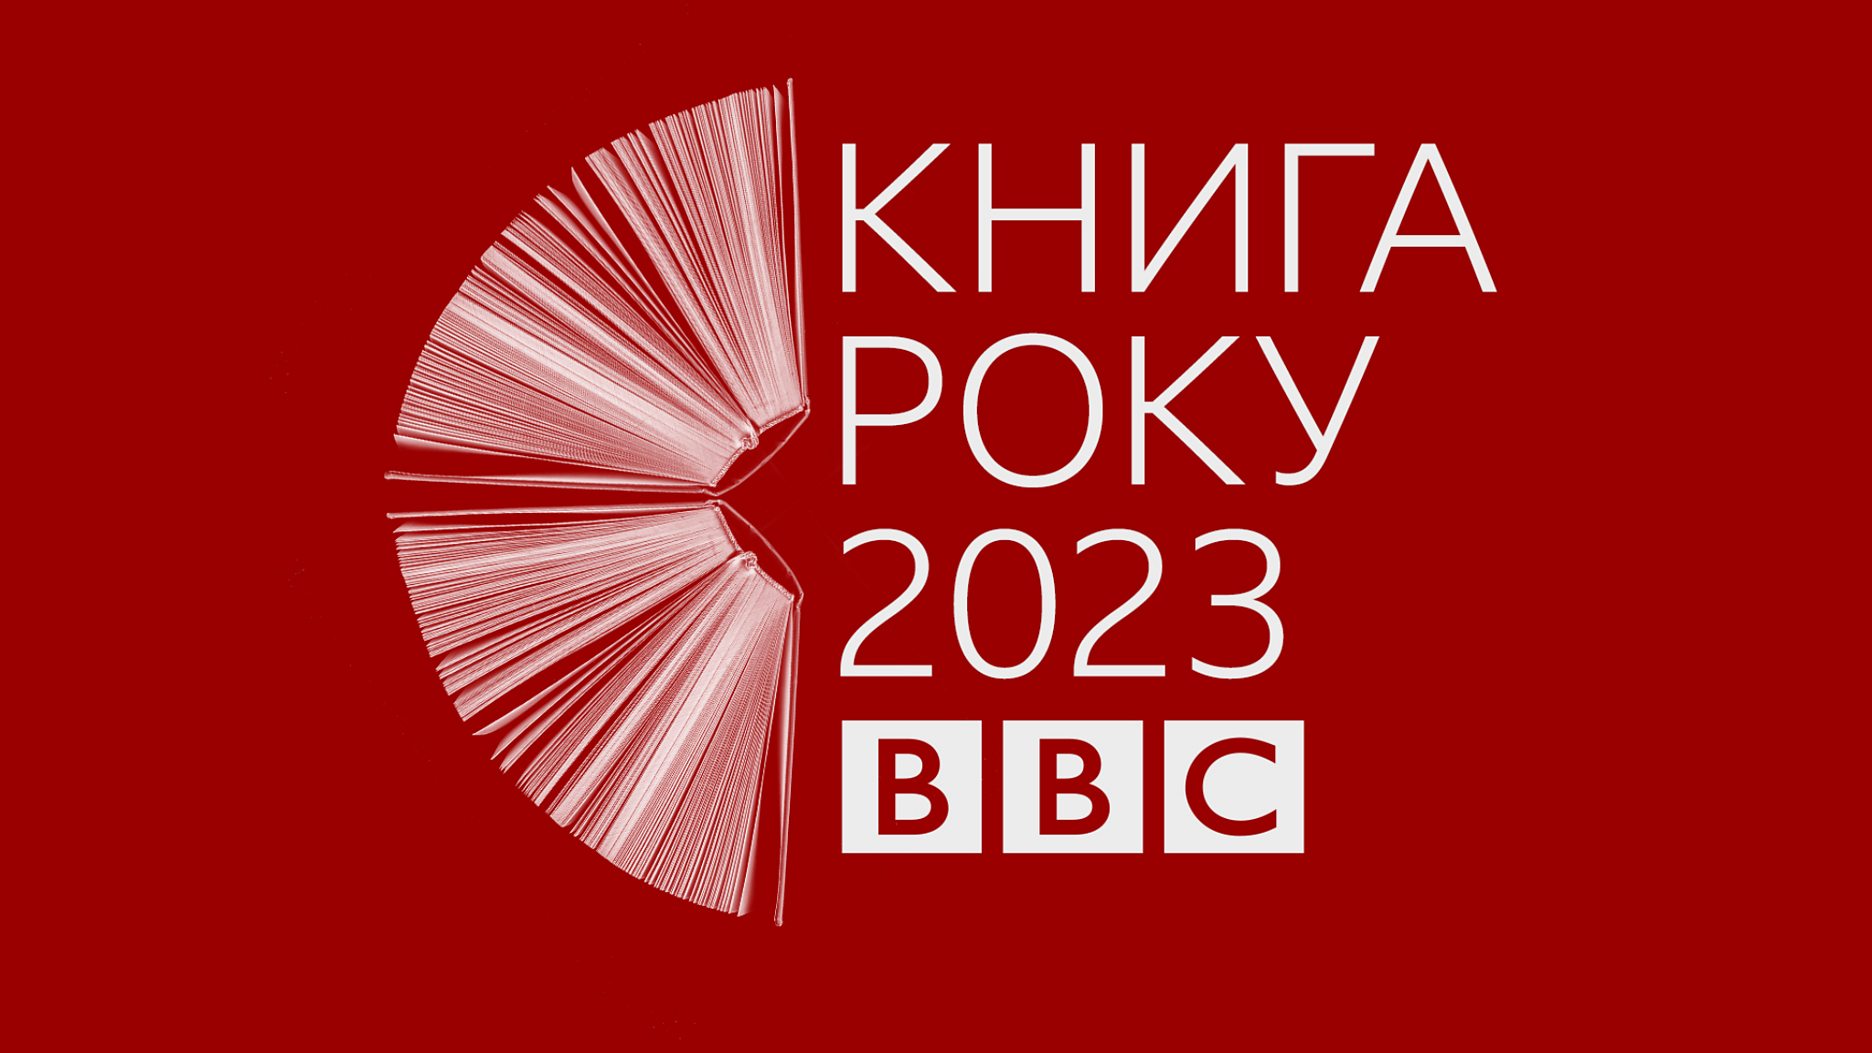 BBC News Ukraine Book of the Year 2023 contest launches